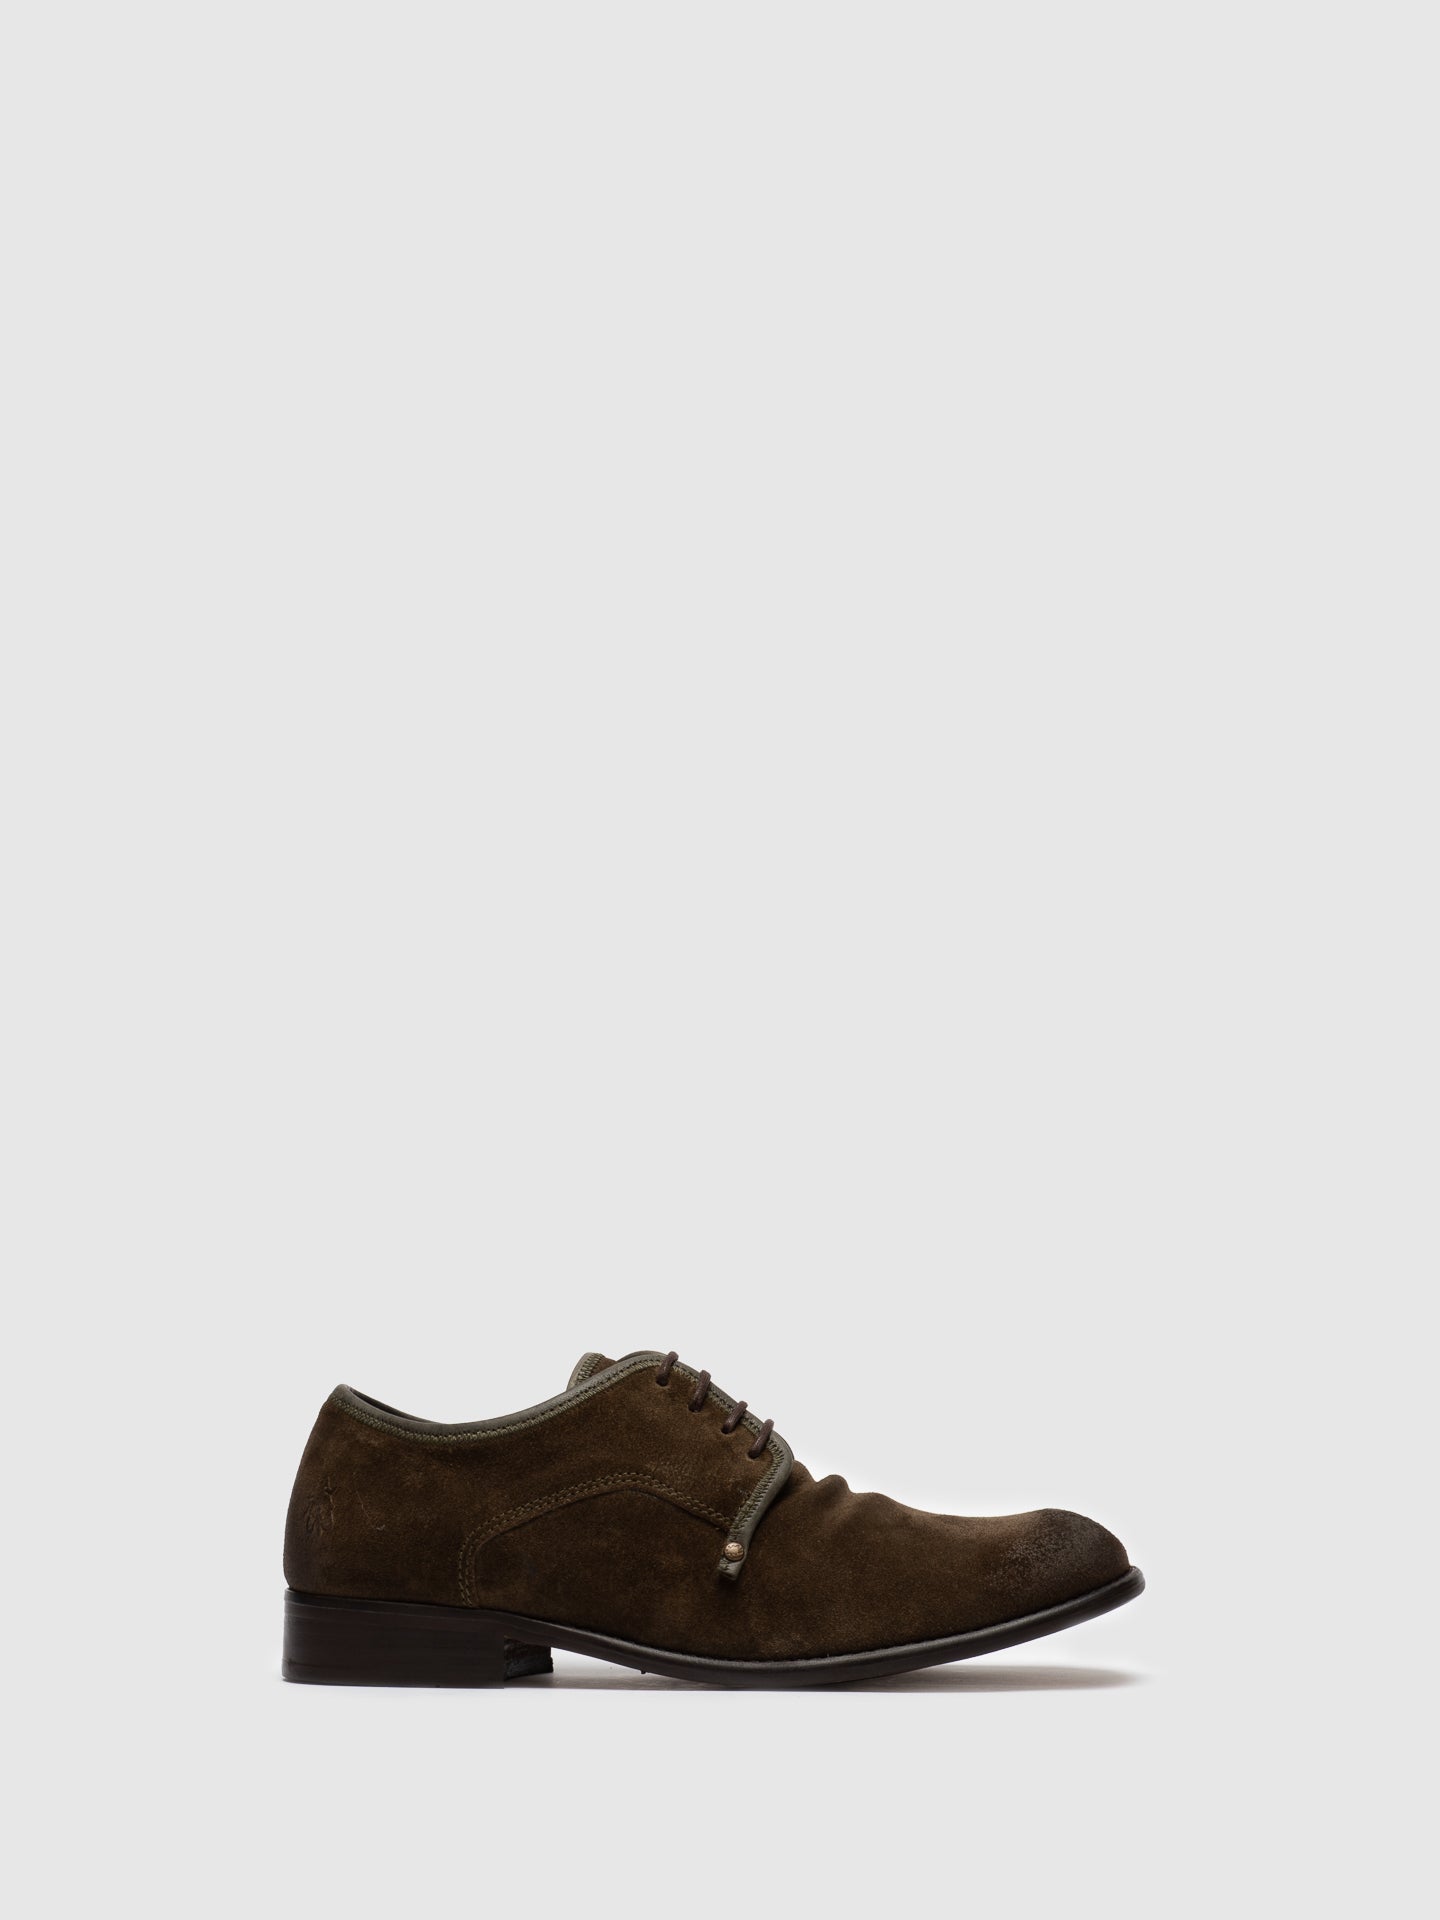 Fly London Olive Lace-up Shoes